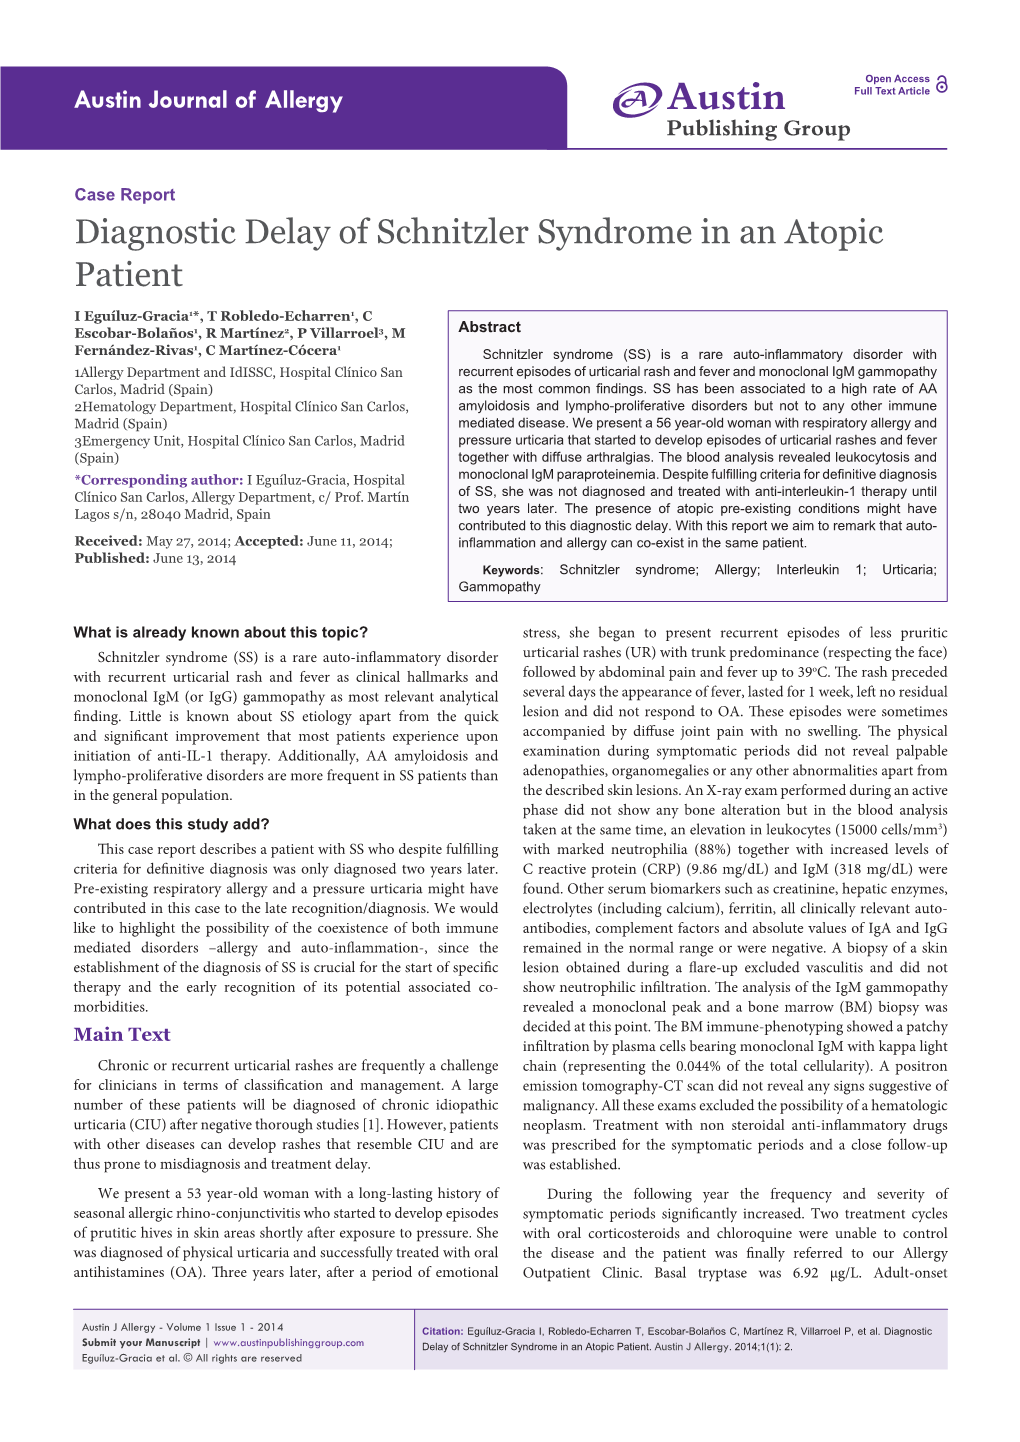 Diagnostic Delay of Schnitzler Syndrome in an Atopic Patient